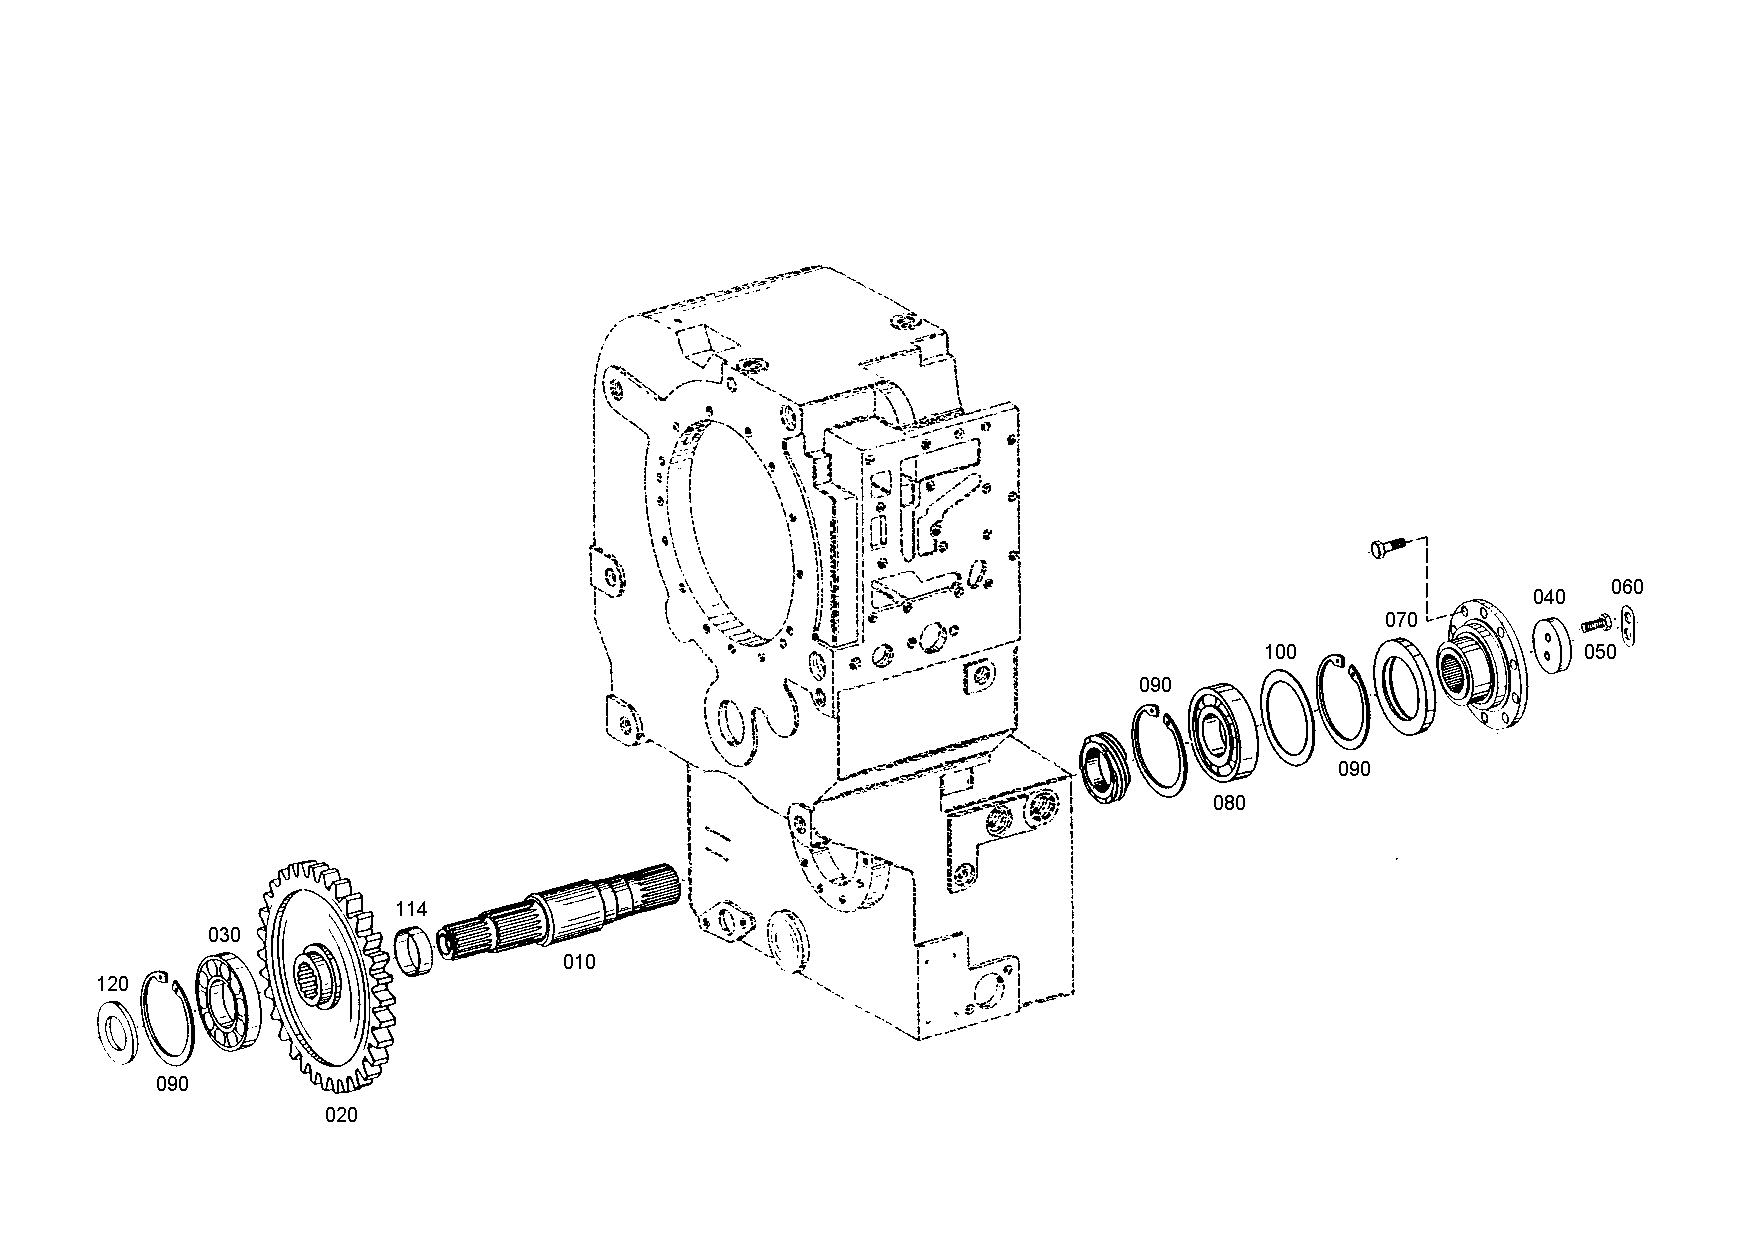 drawing for ASIA MOTORS CO. INC. 409-01-0180 - SHIM (figure 3)